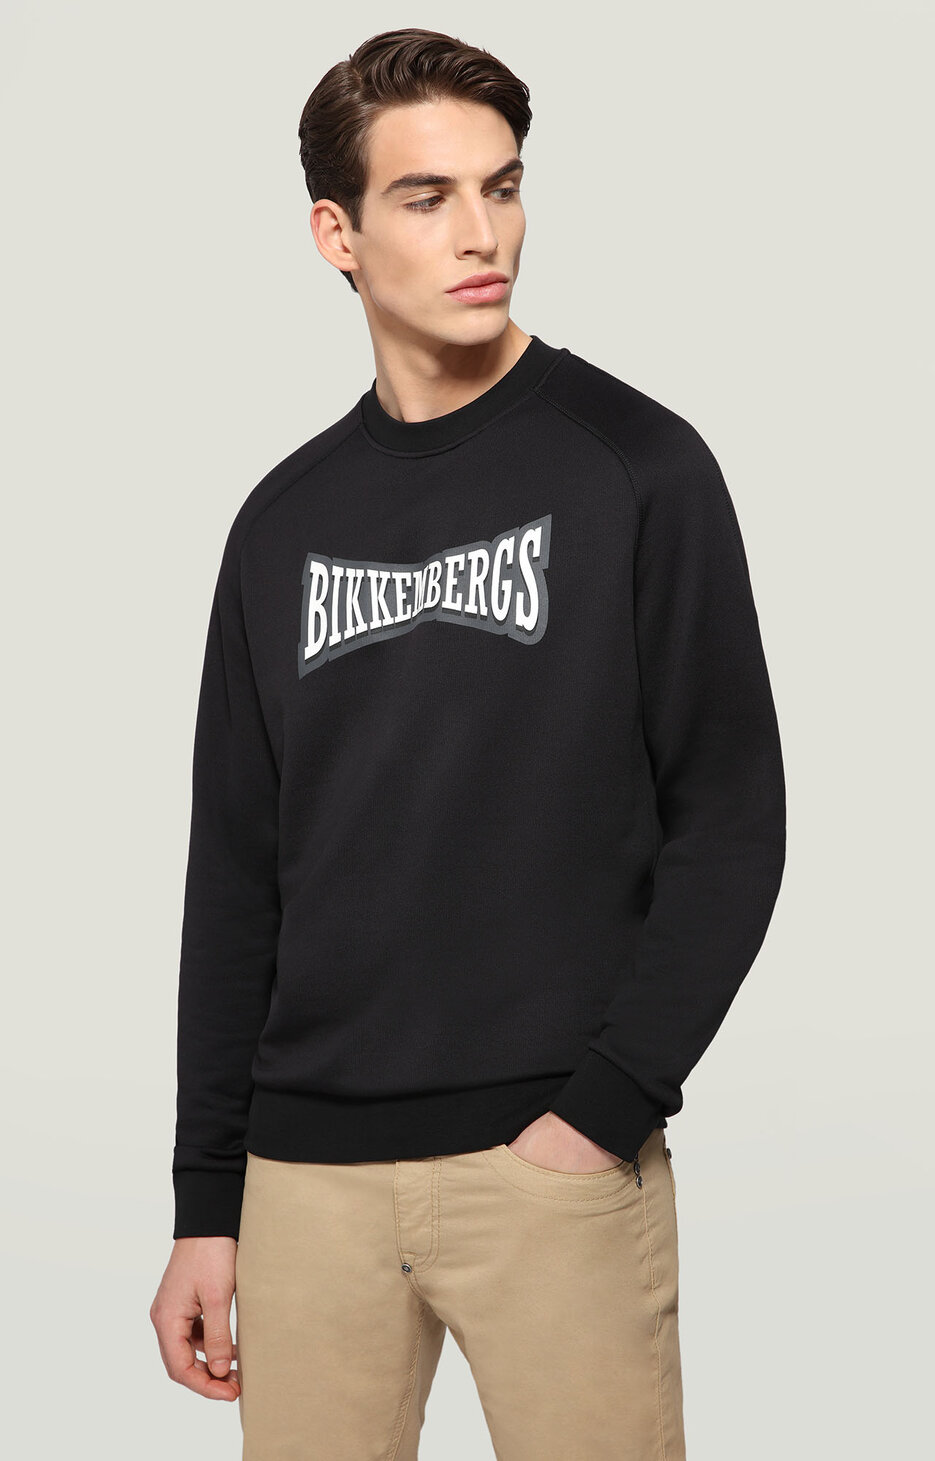 Men's clothing, shoes, accessories | Bikkembergs